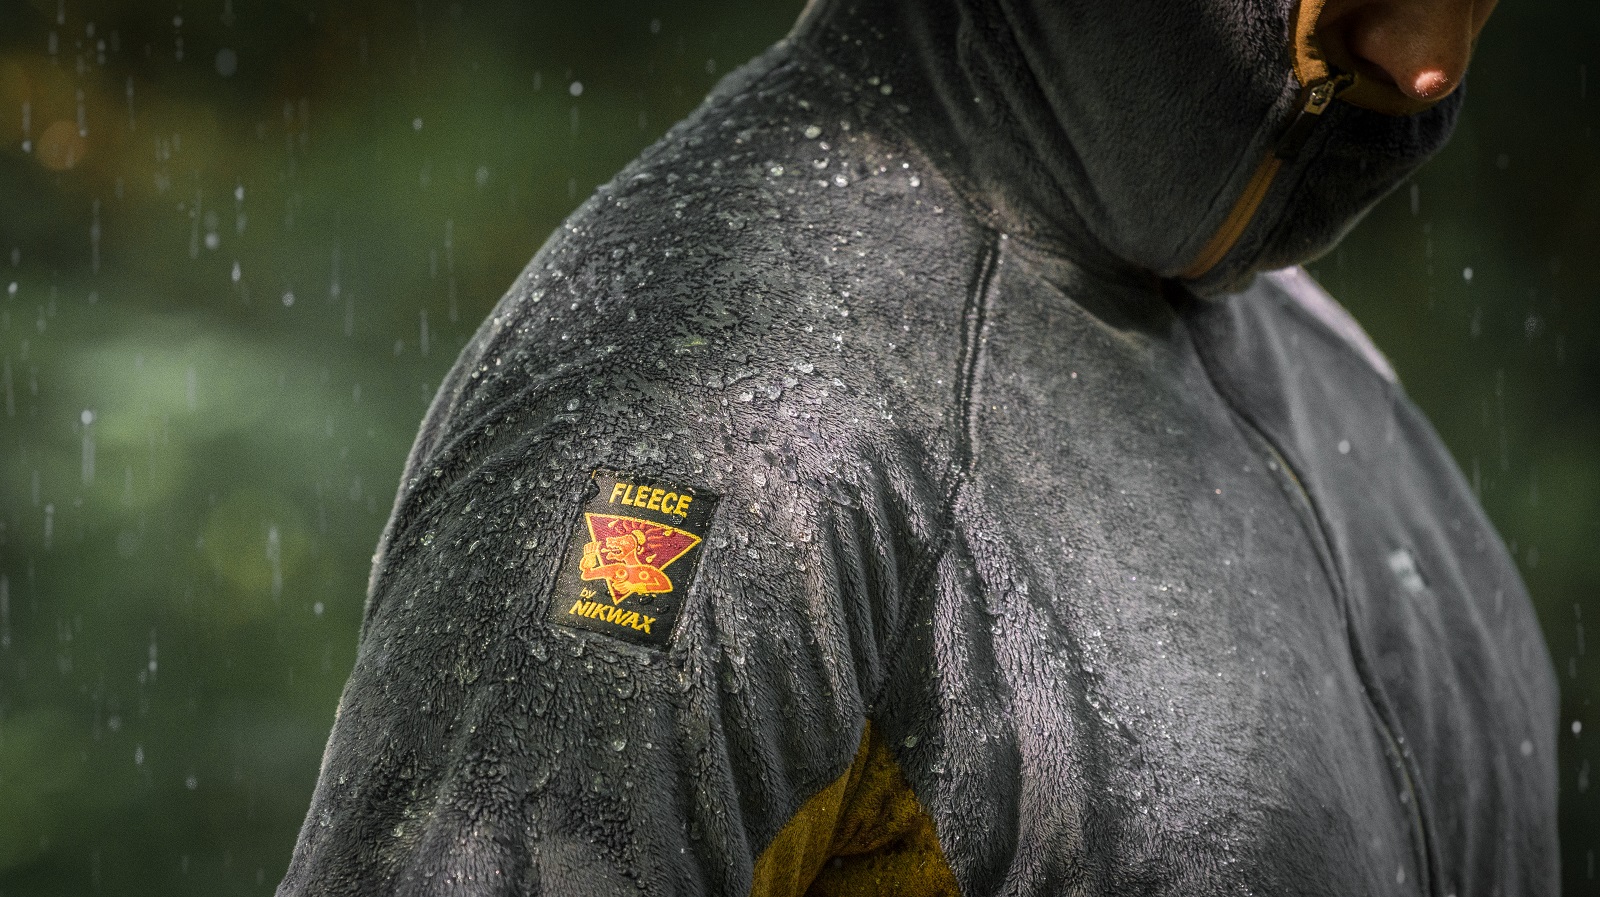 Nikwax Softshell Proof Wash-In High Performance Waterproofing Renewal  Treatment Restores DWR Water Repellency In Jackets